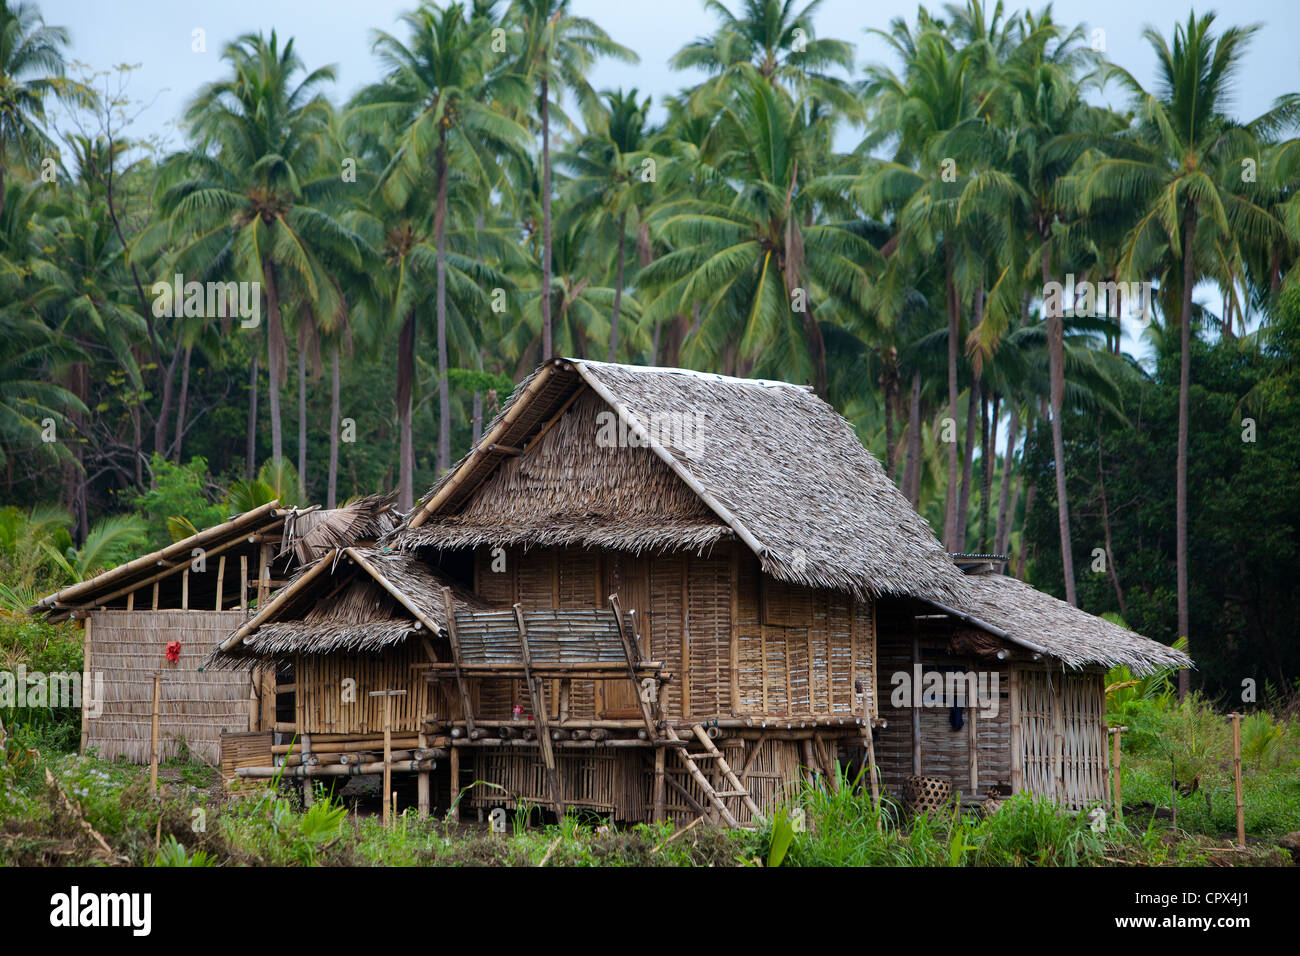 a typical house in the forest, Negros, Philippines Stock Photo